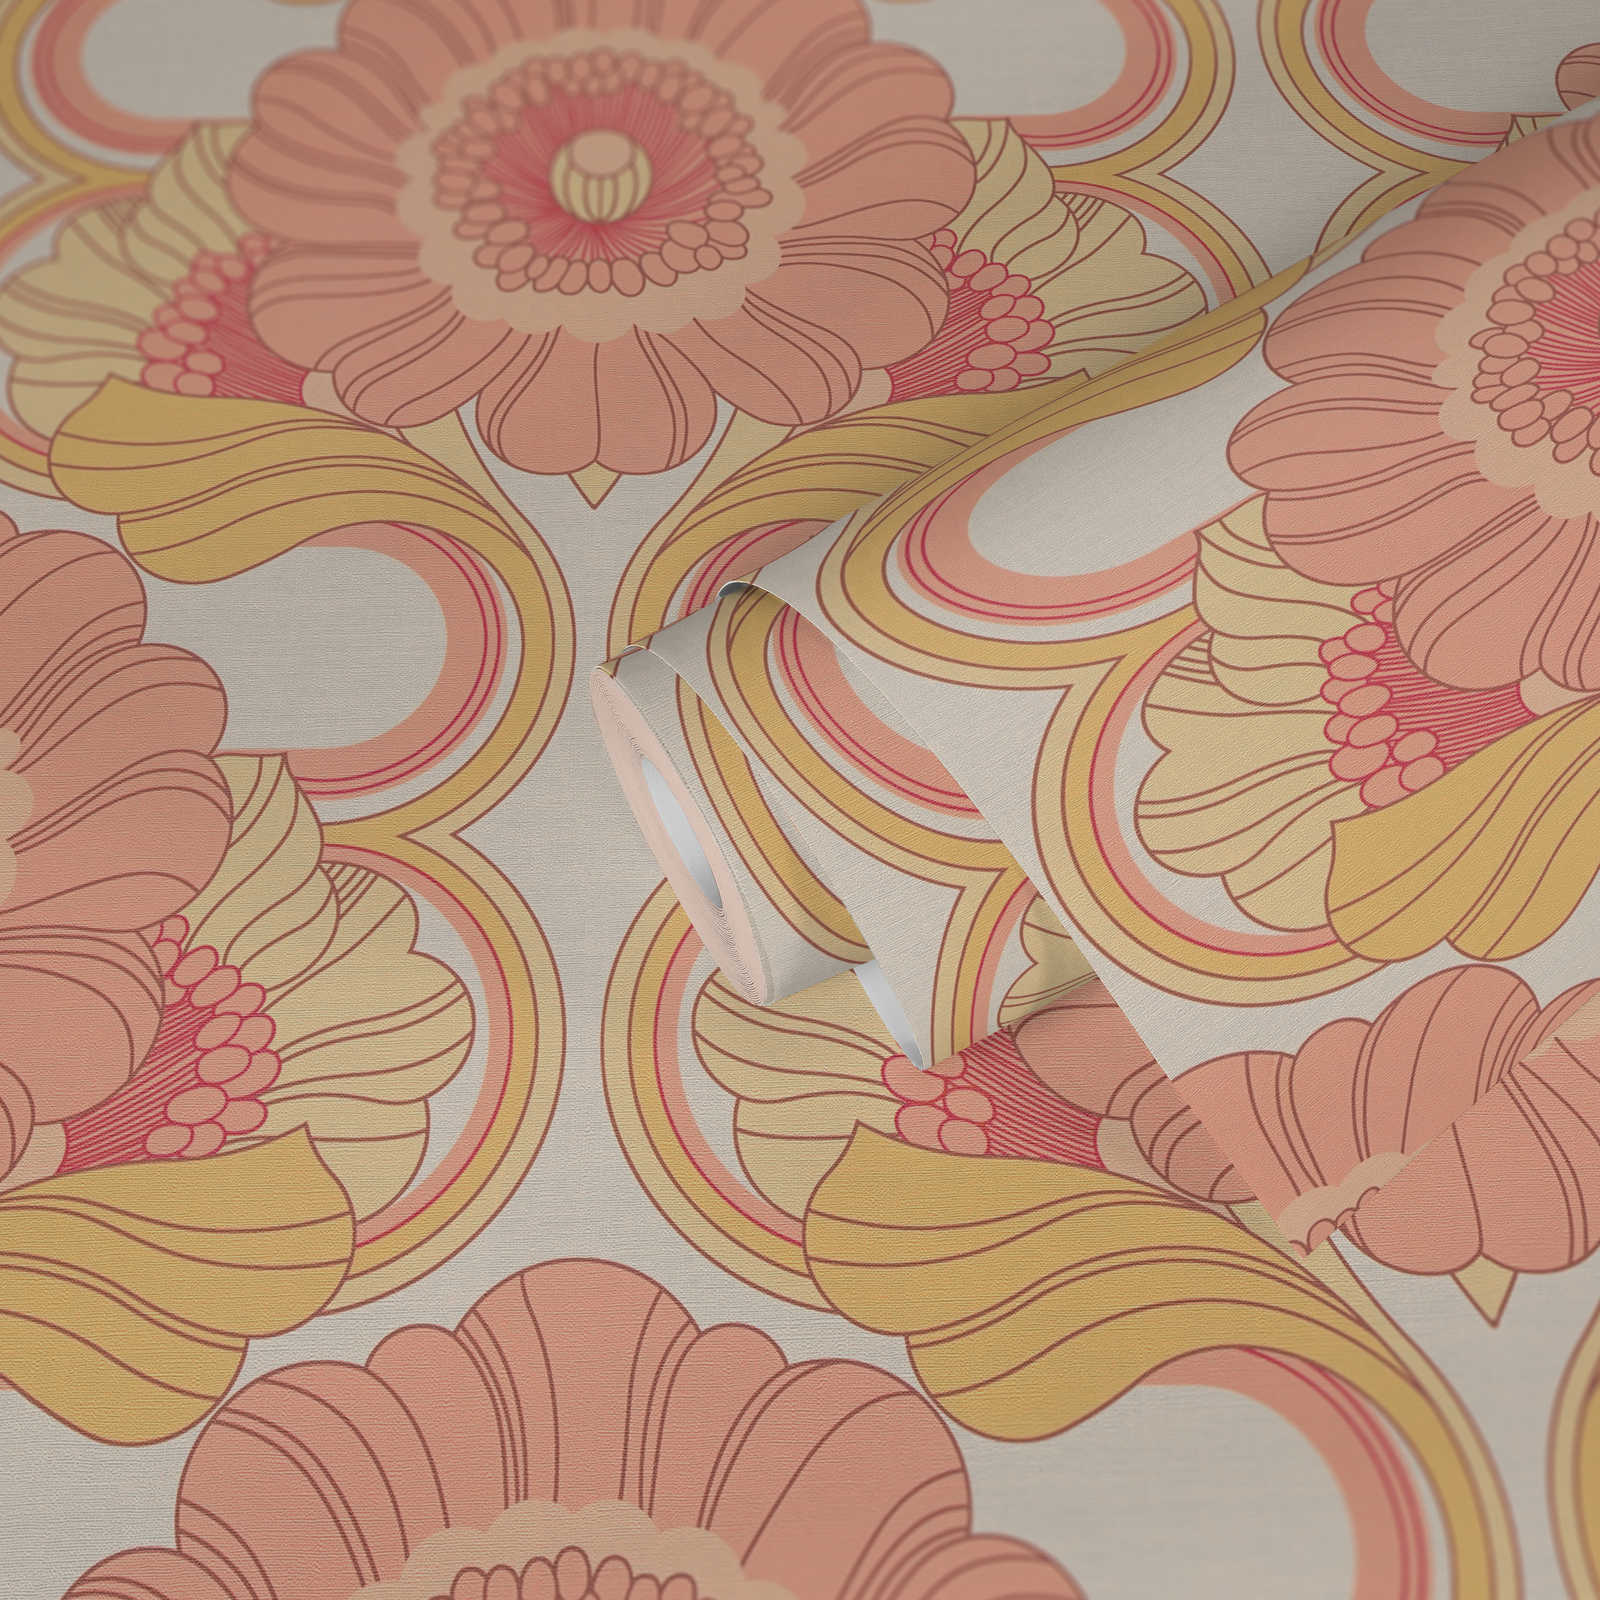             Floral retro wallpaper with light structure - yellow, pink, white
        